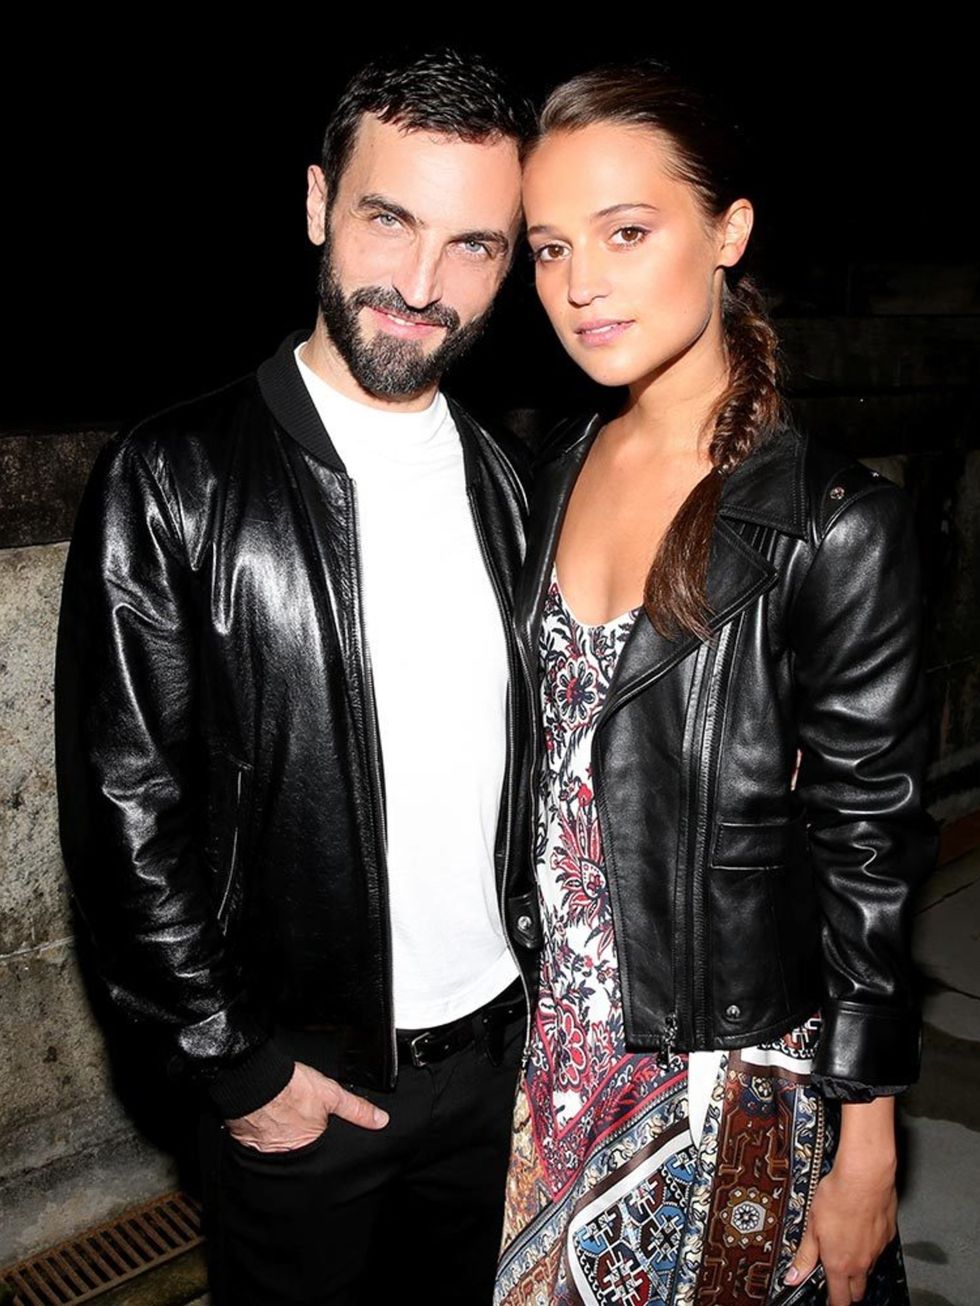 Nicholas Ghesquiere and Alicia Vikander at the Louis Vuitton Cruise party in Rio, May 2016.